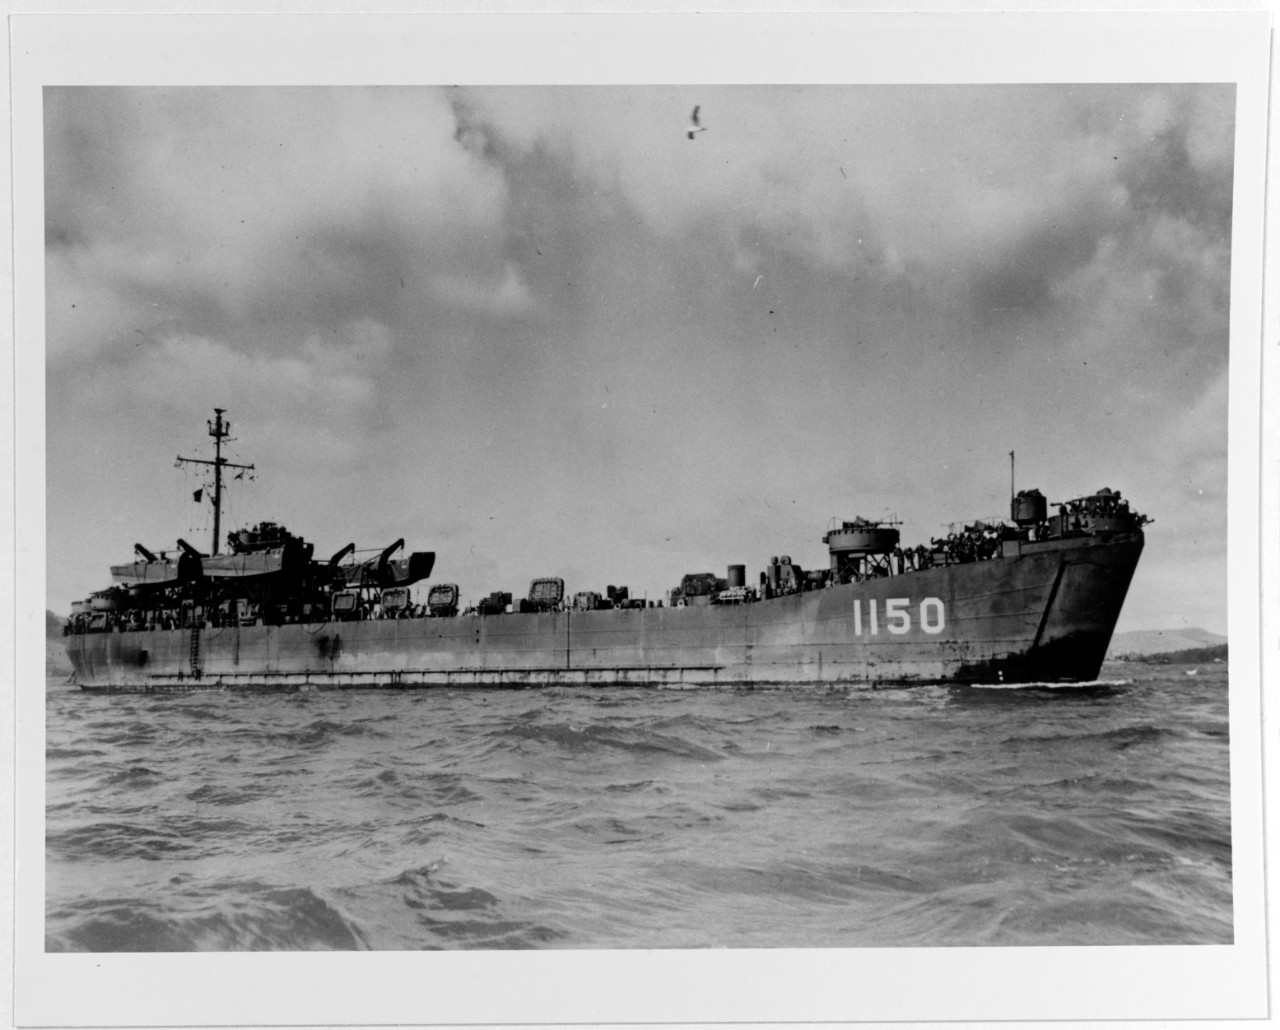 USS LST-1150 (later renamed SUTTER COUNTY)